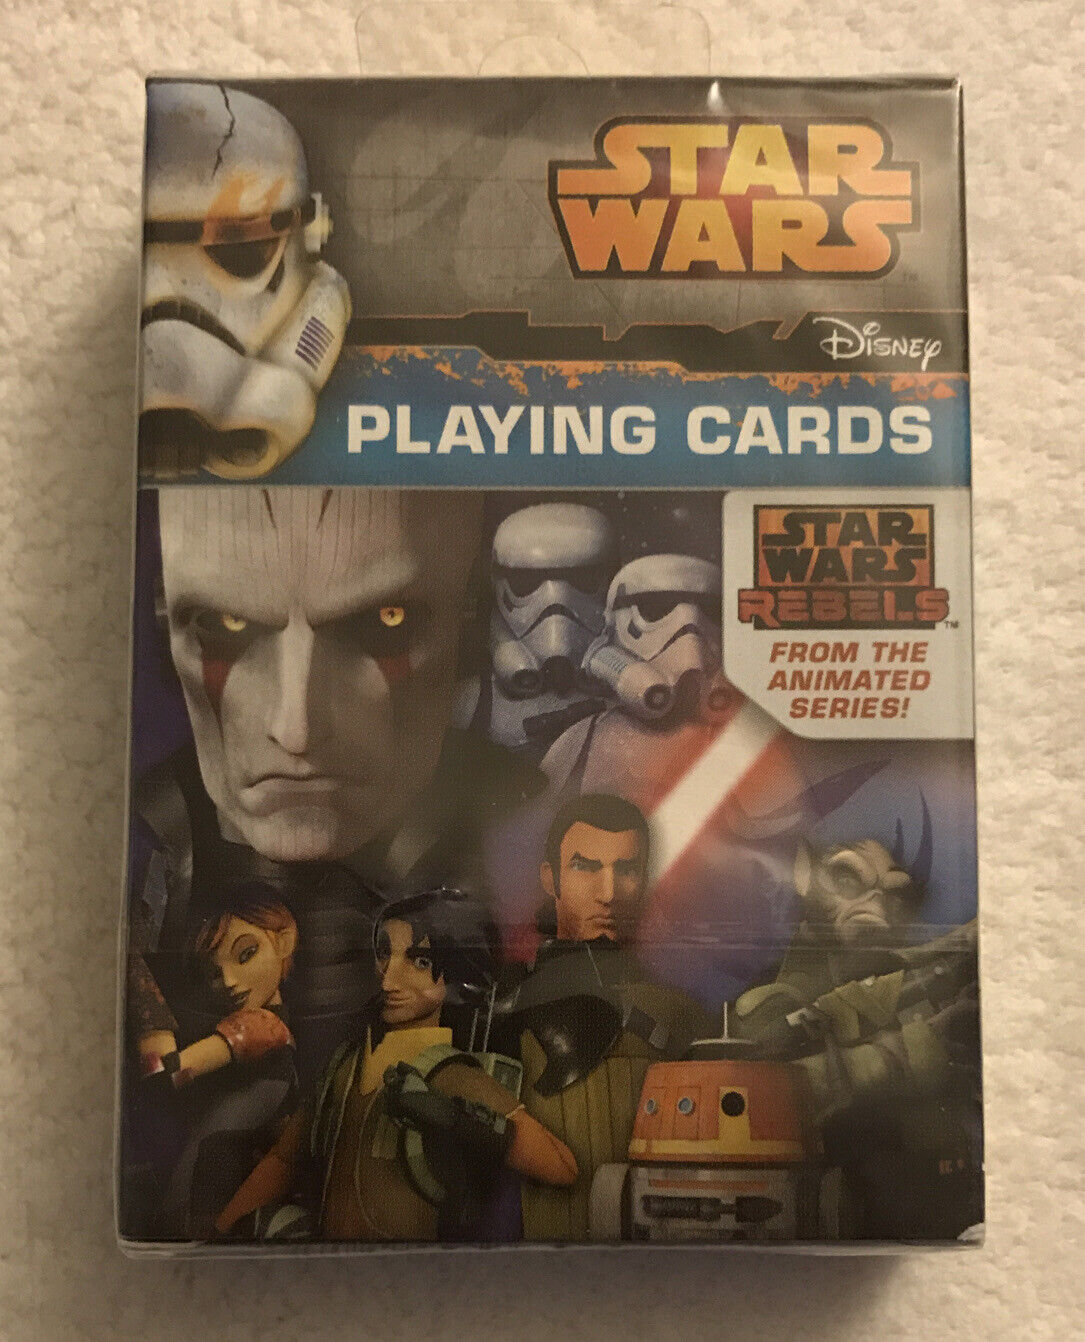 *NEW* Star Wars The Force Awakens Star Wars Rebels Playing Cards